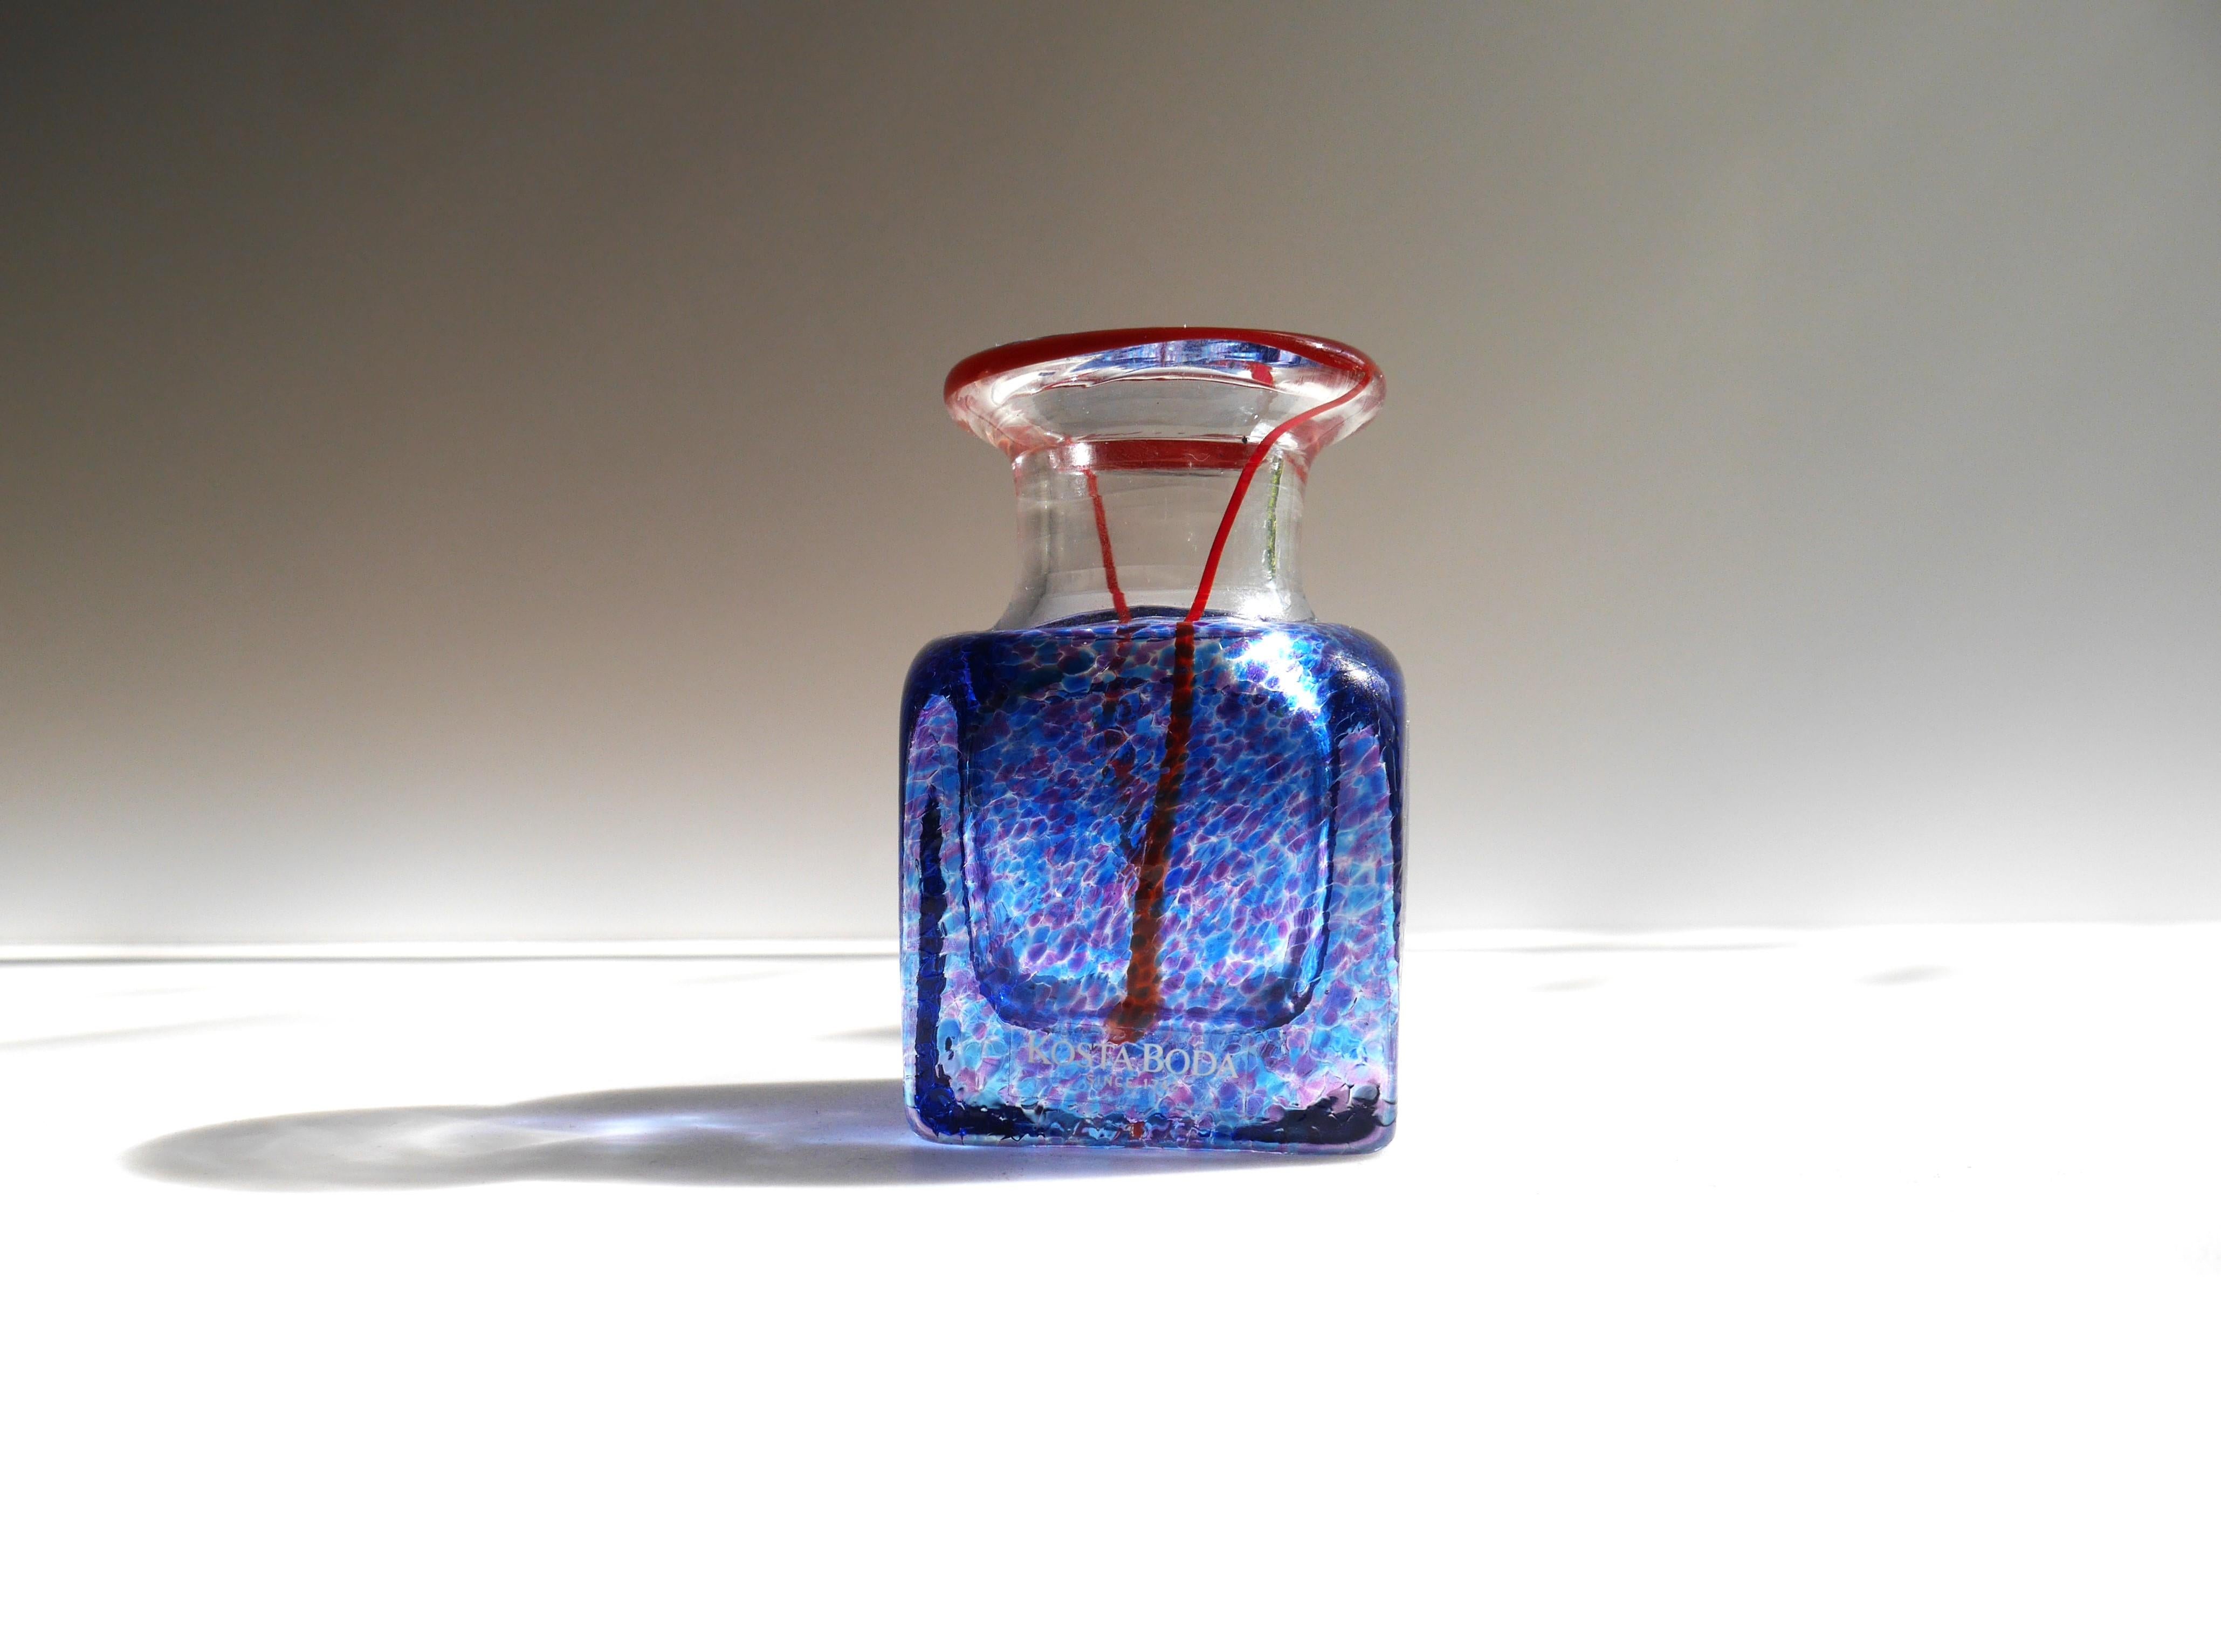 A beautiful and rare vintage miniature glass vase handmade and signed by Bertil Vallien for Kosta Boda, (Boda Åfors) Sweden. It is perfect condition and signed 